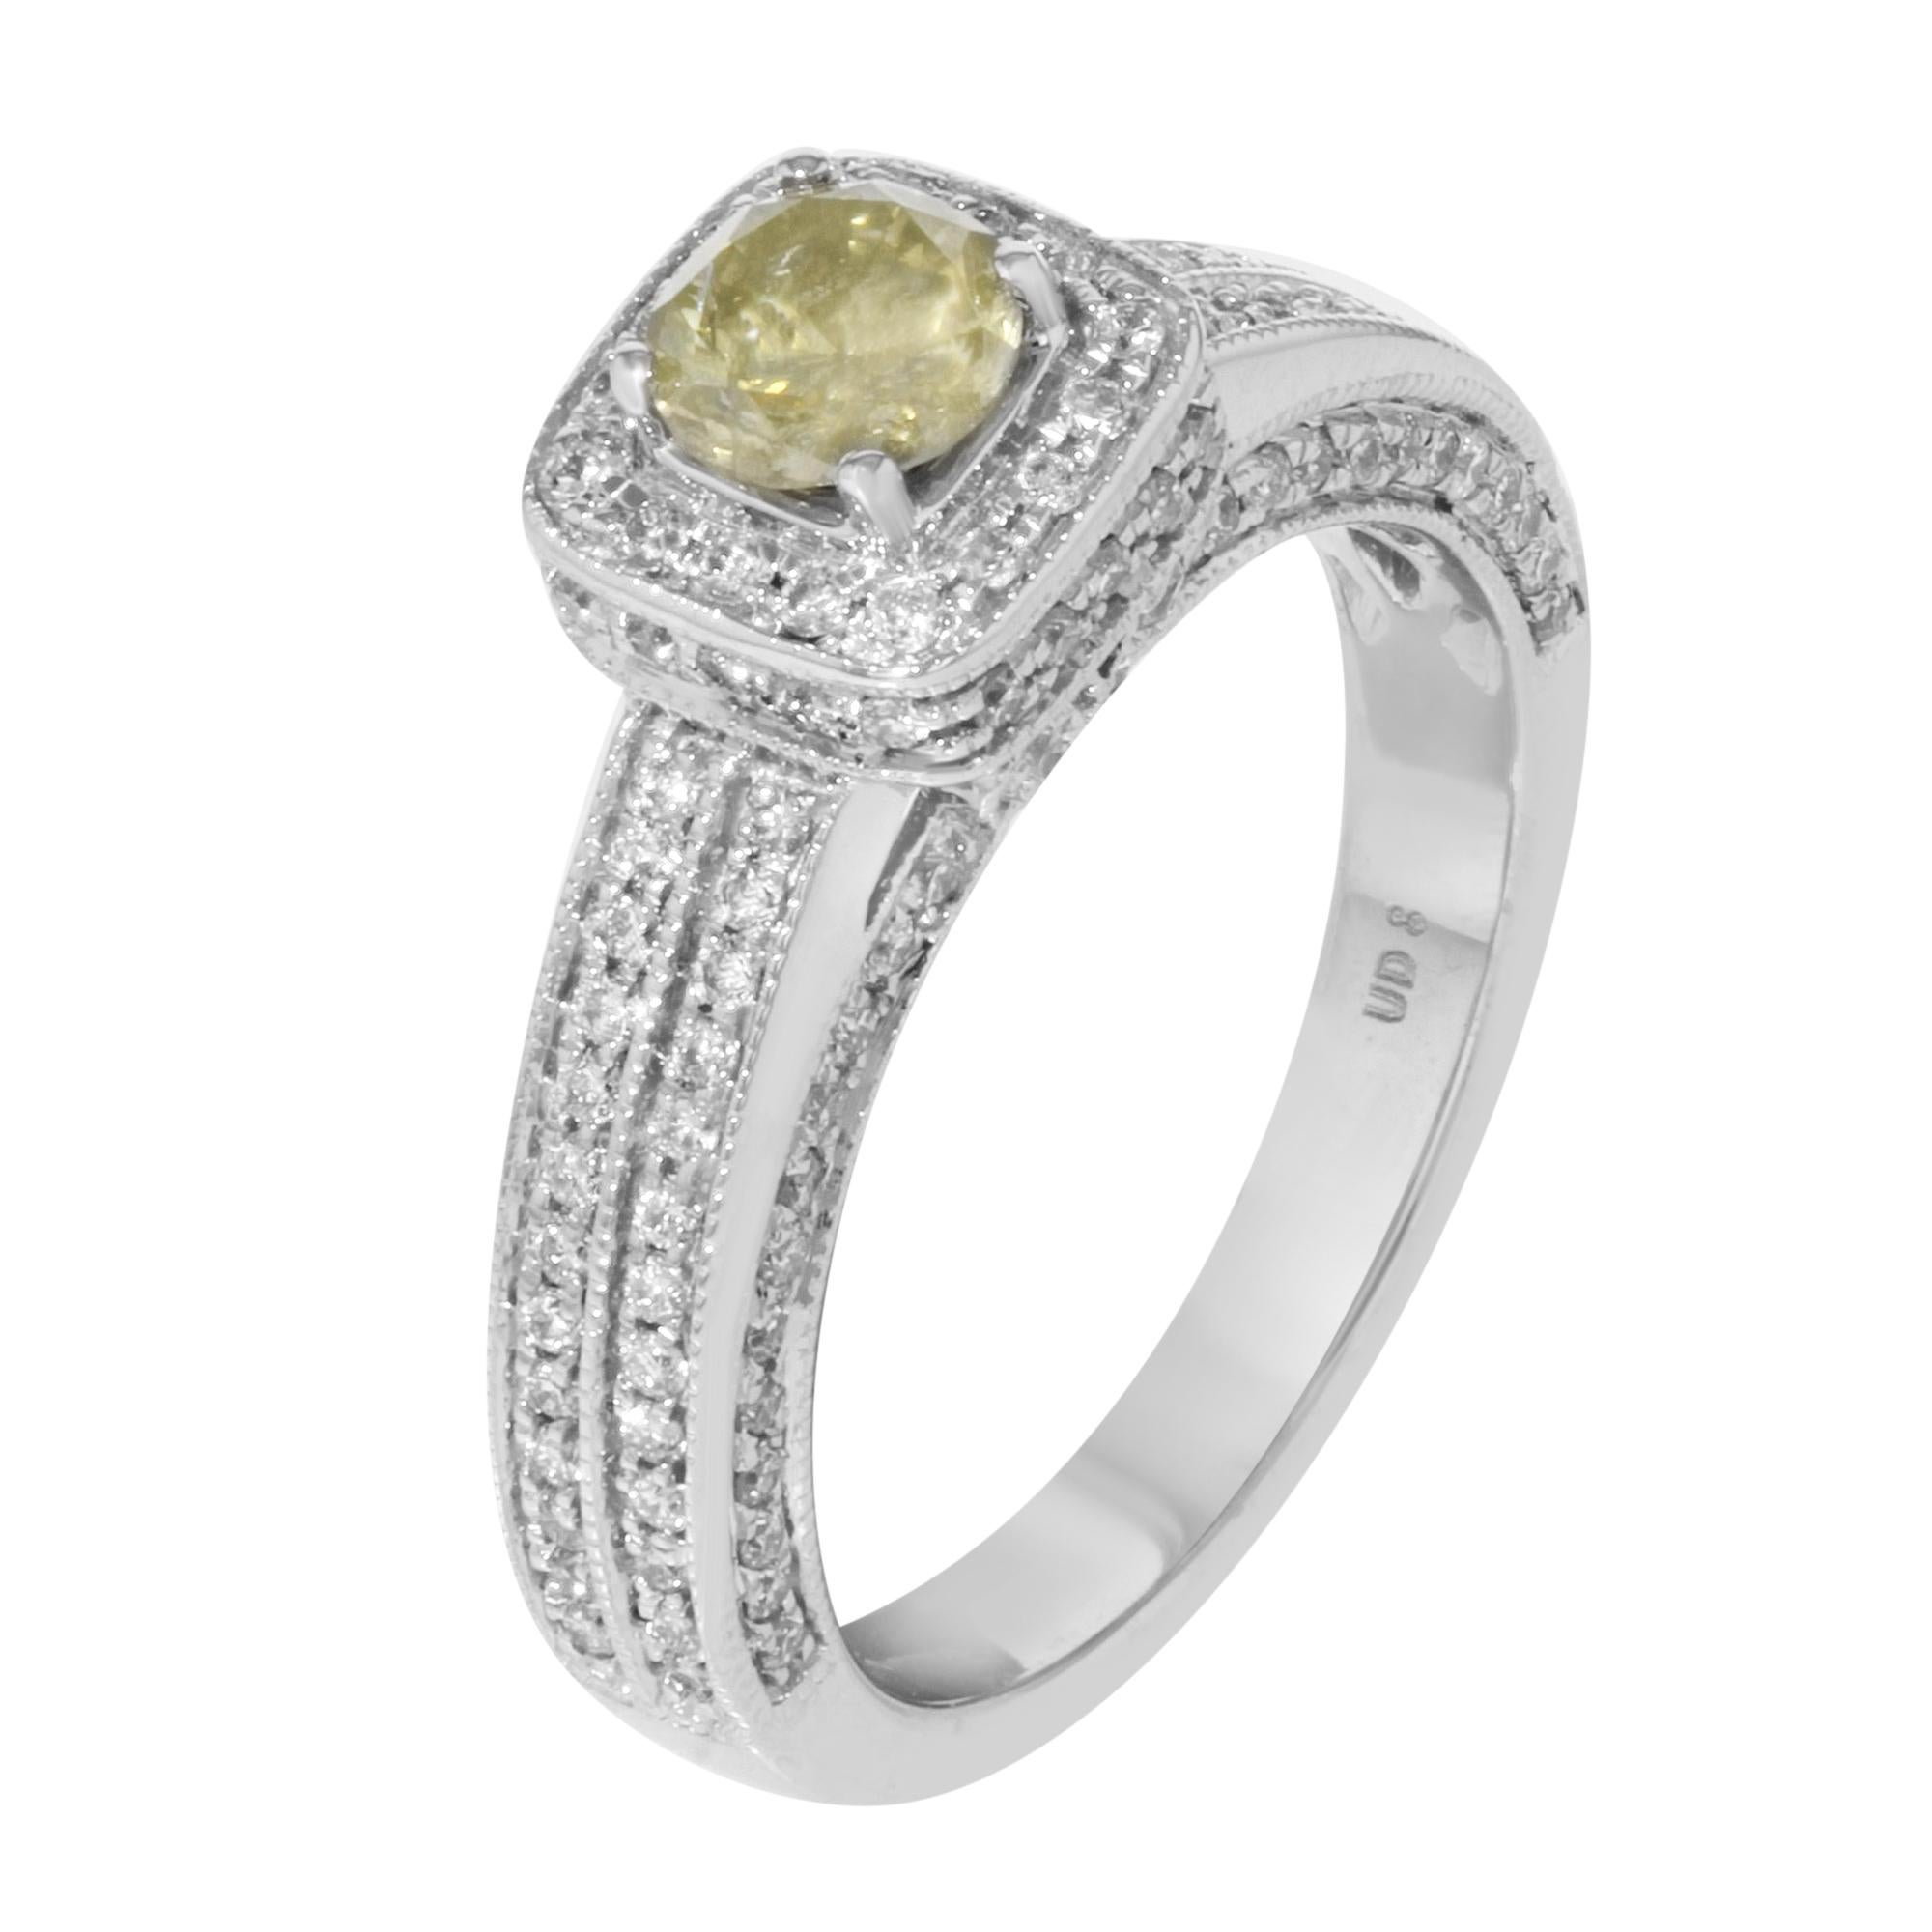 This fancy yellowdiamond halo engagement ring from our Rachel Koen Bridal Collection could be a great option to celebrate the day you exchange vows with the love of your life. The ring is crafted in 14k white gold. The beautiful yellow round cut